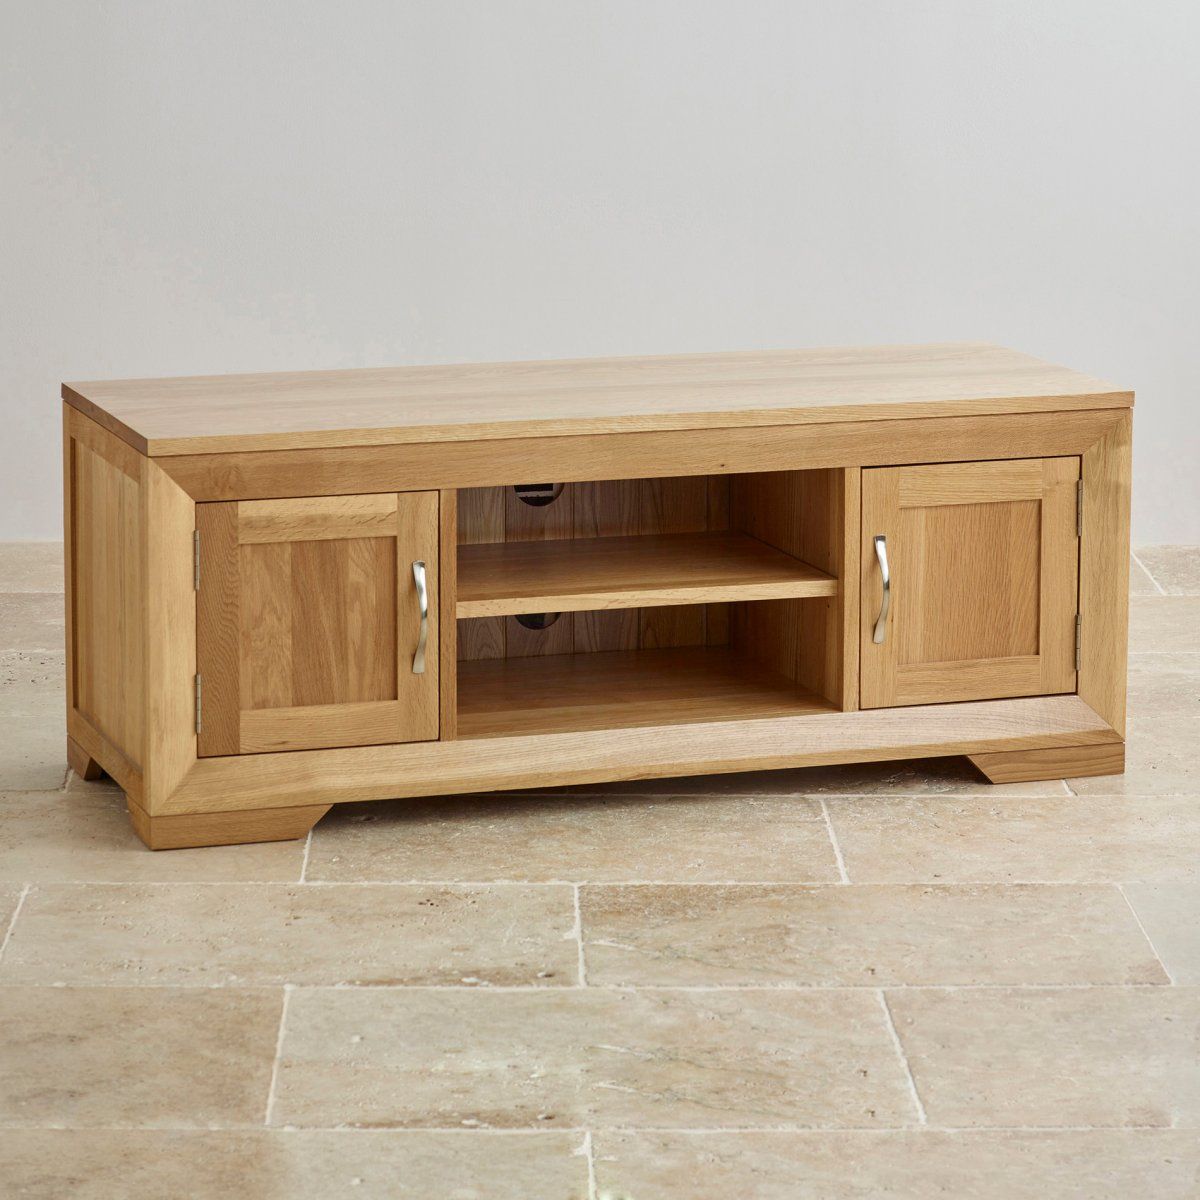 Bevel Natural Solid Oak Widescreen Tv + Dvd Cabinet Pertaining To Oak Tv Stands Furniture (View 5 of 15)